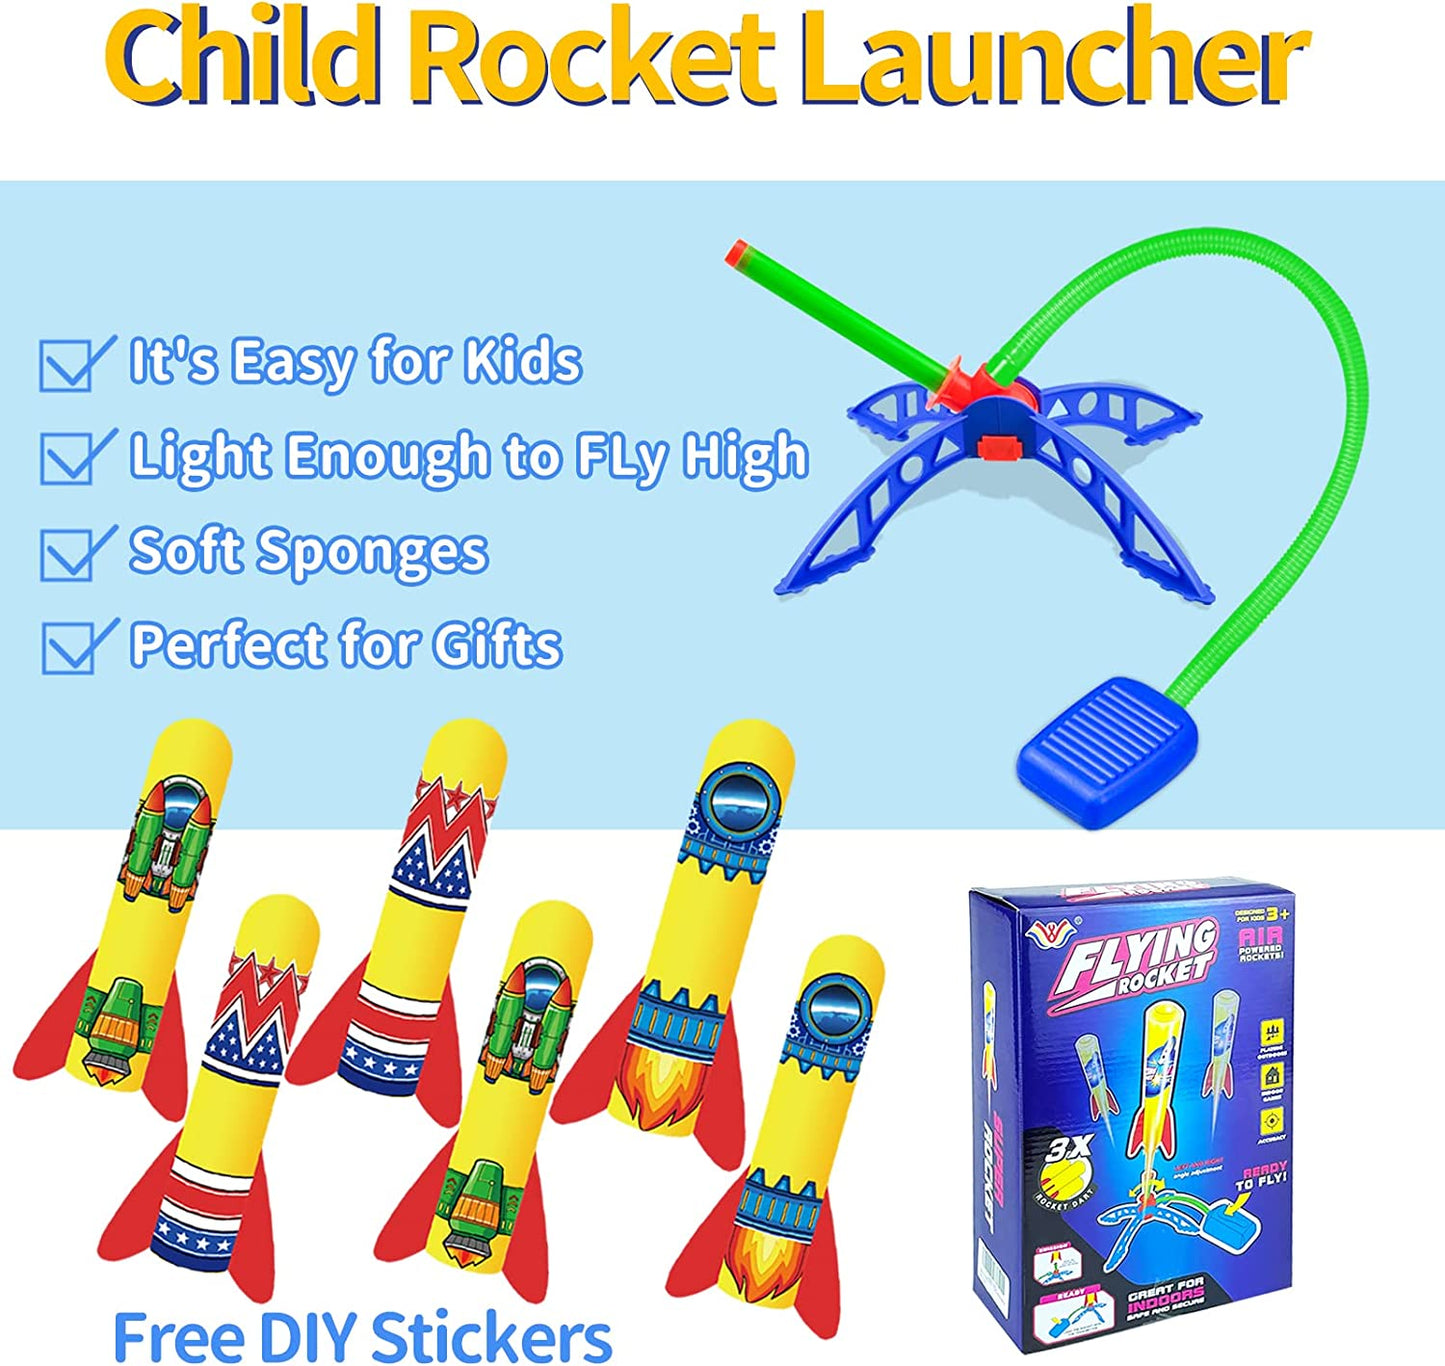 Rocket & Planes with Air Powered Launcher Toys for Kids Ages 3 4 5 6 7 8-12 Years Old Boys Girls Outdoor Jumping Step On Games Party Favors, Outside Games STEAM Toys Birthday Xmas Gifts